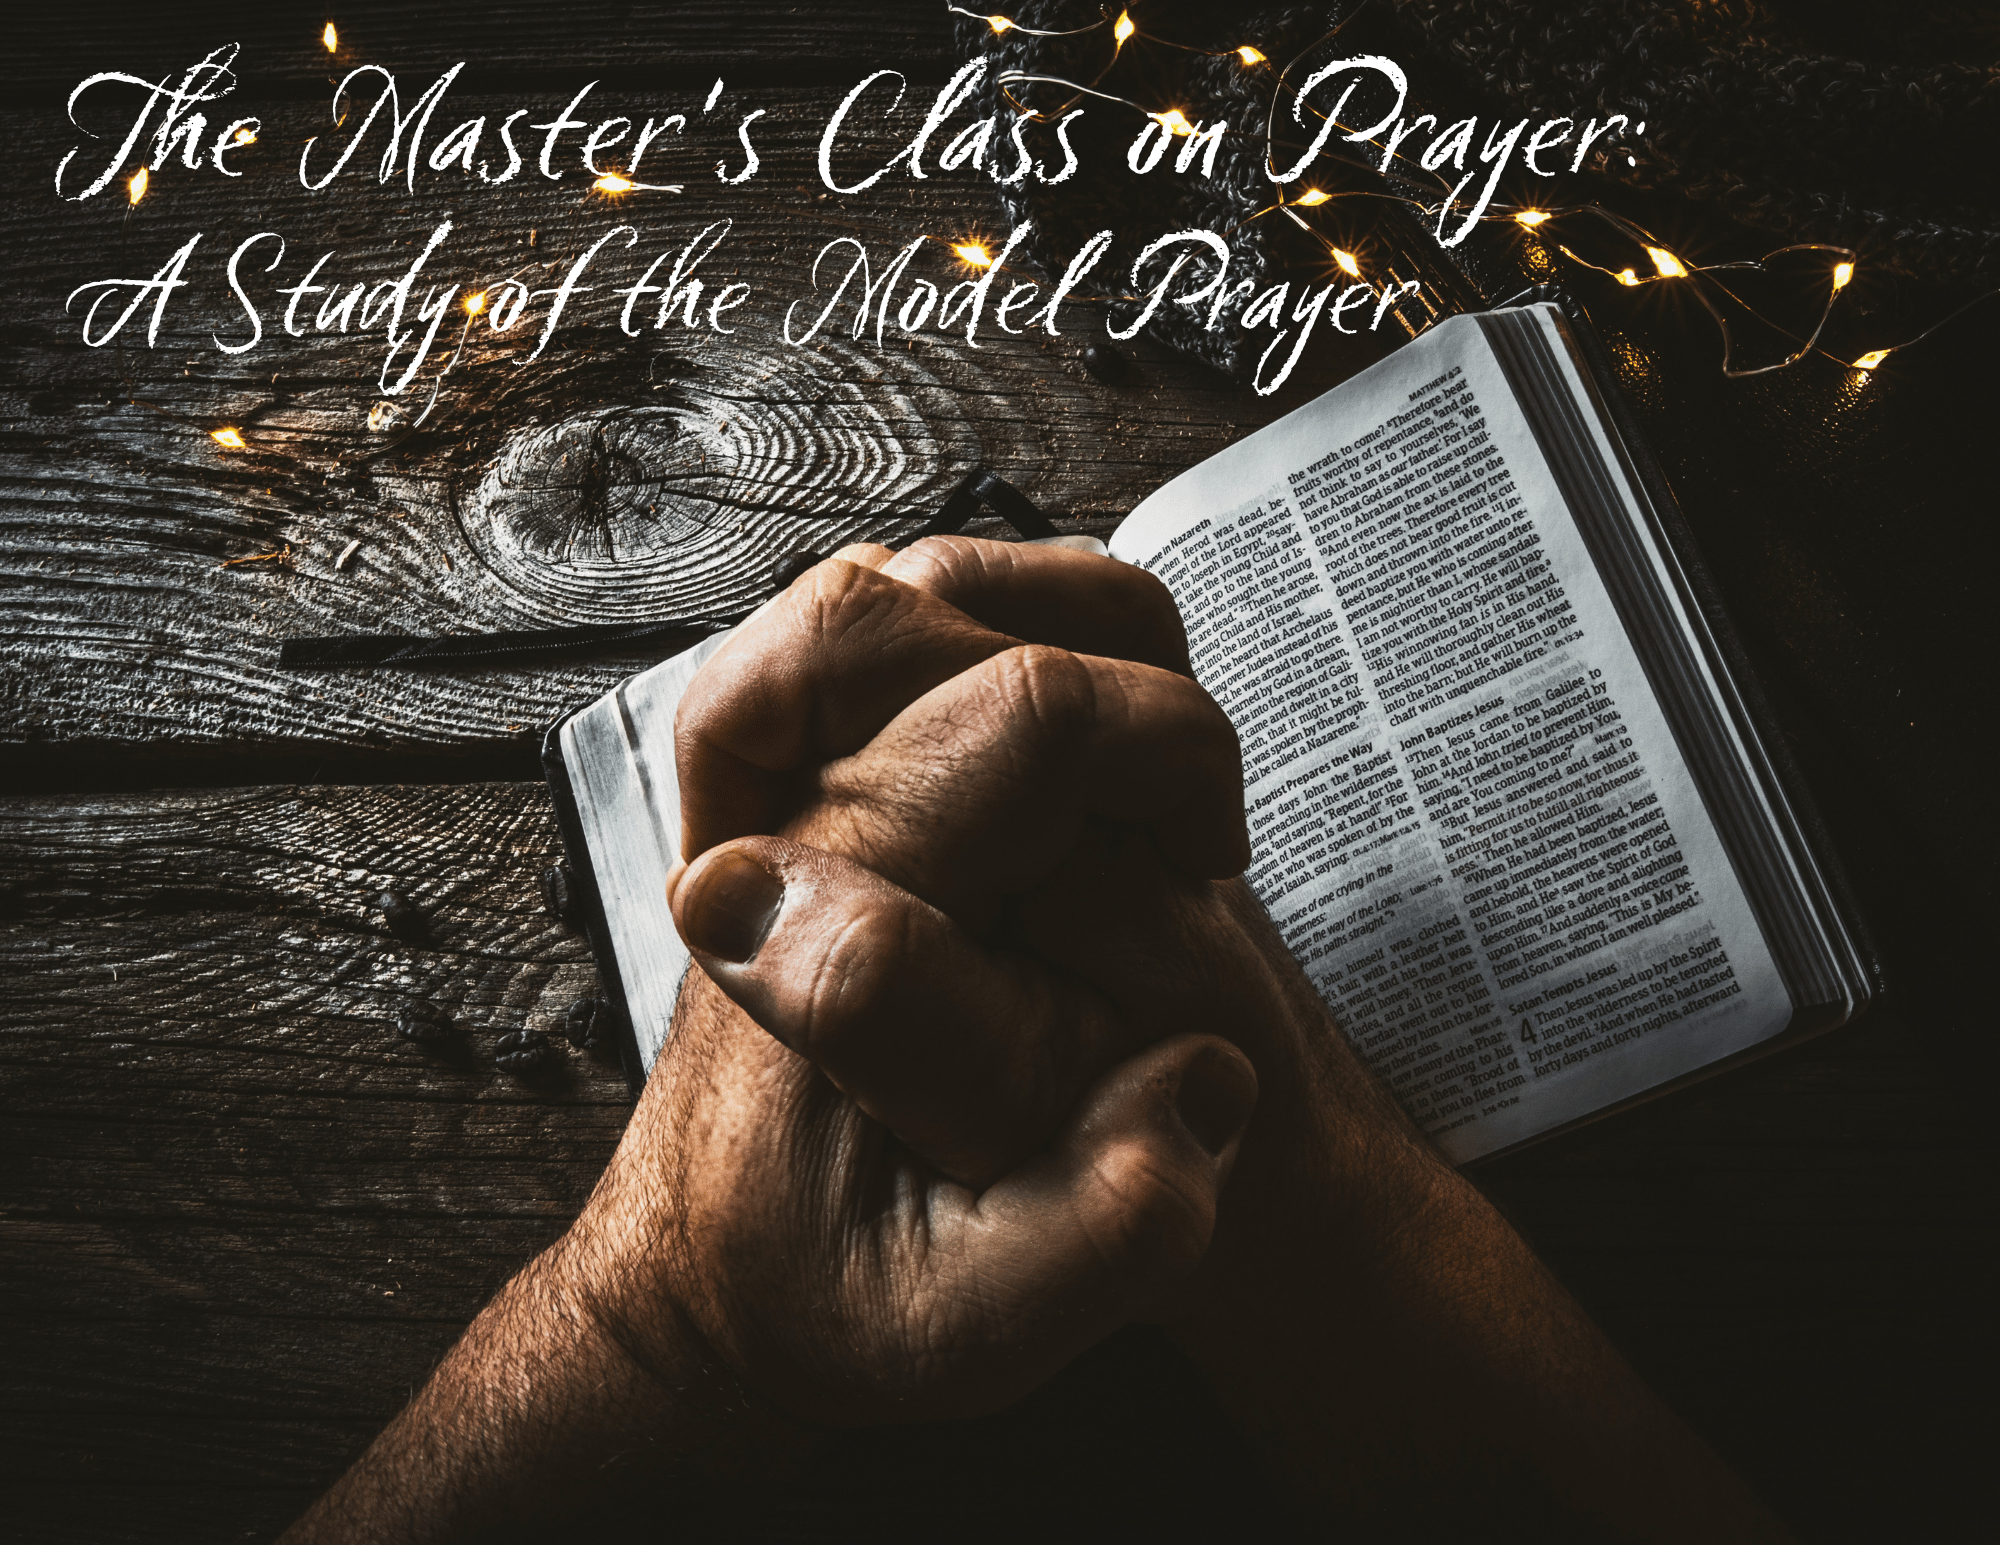 “Master’s Class on Prayer – An Audience of One”